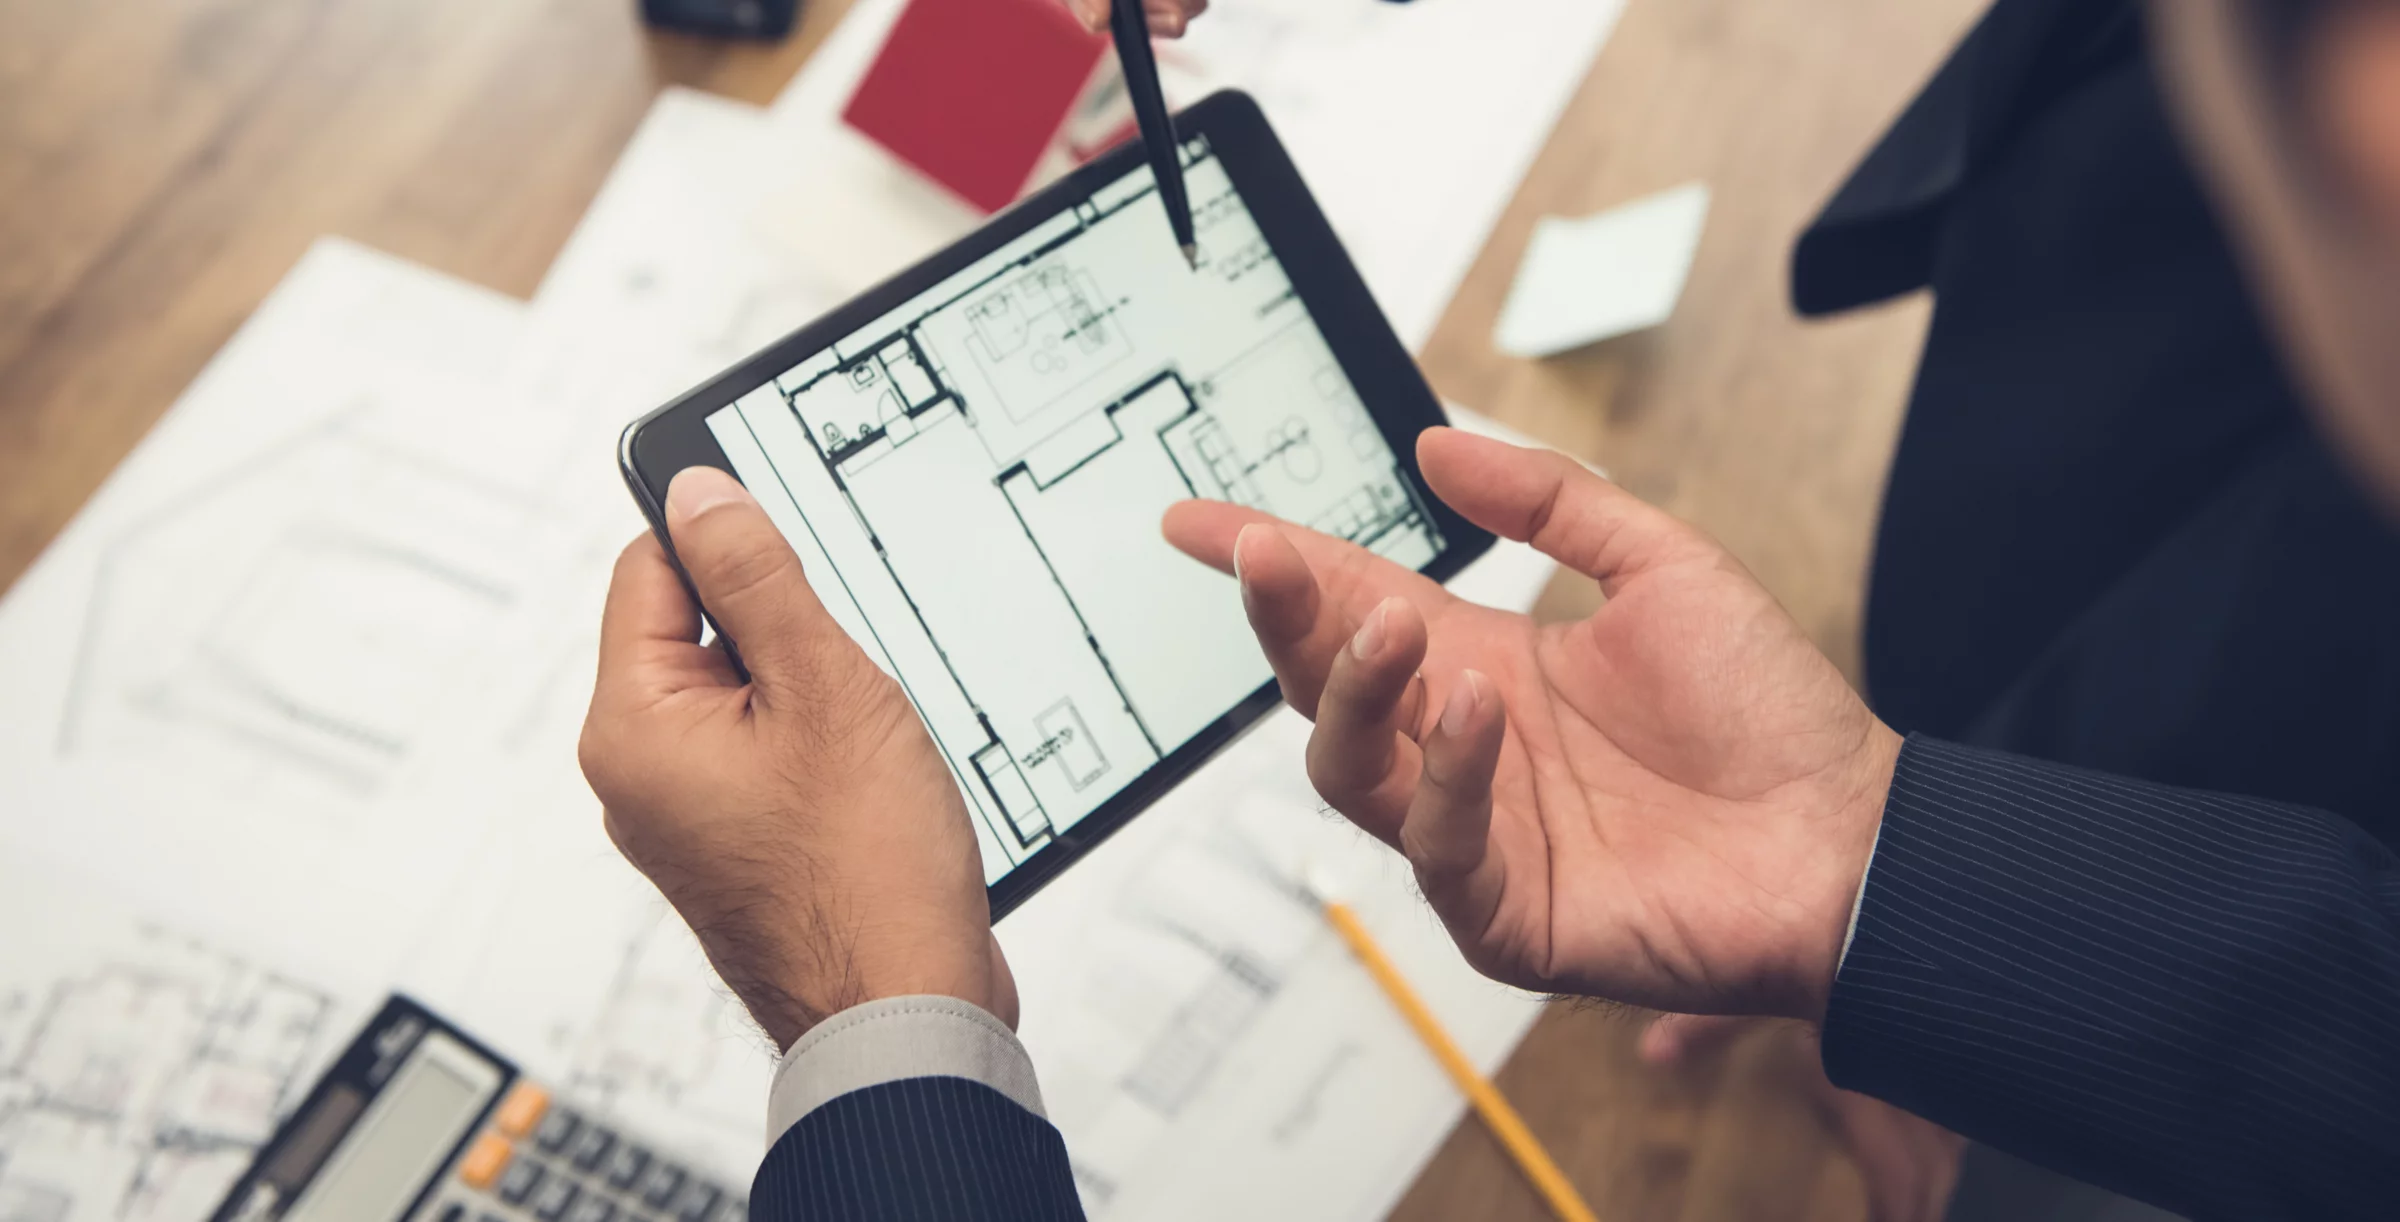 Real estate agent with client or architect team checking a housing model and its blueprints digitally using a tablet